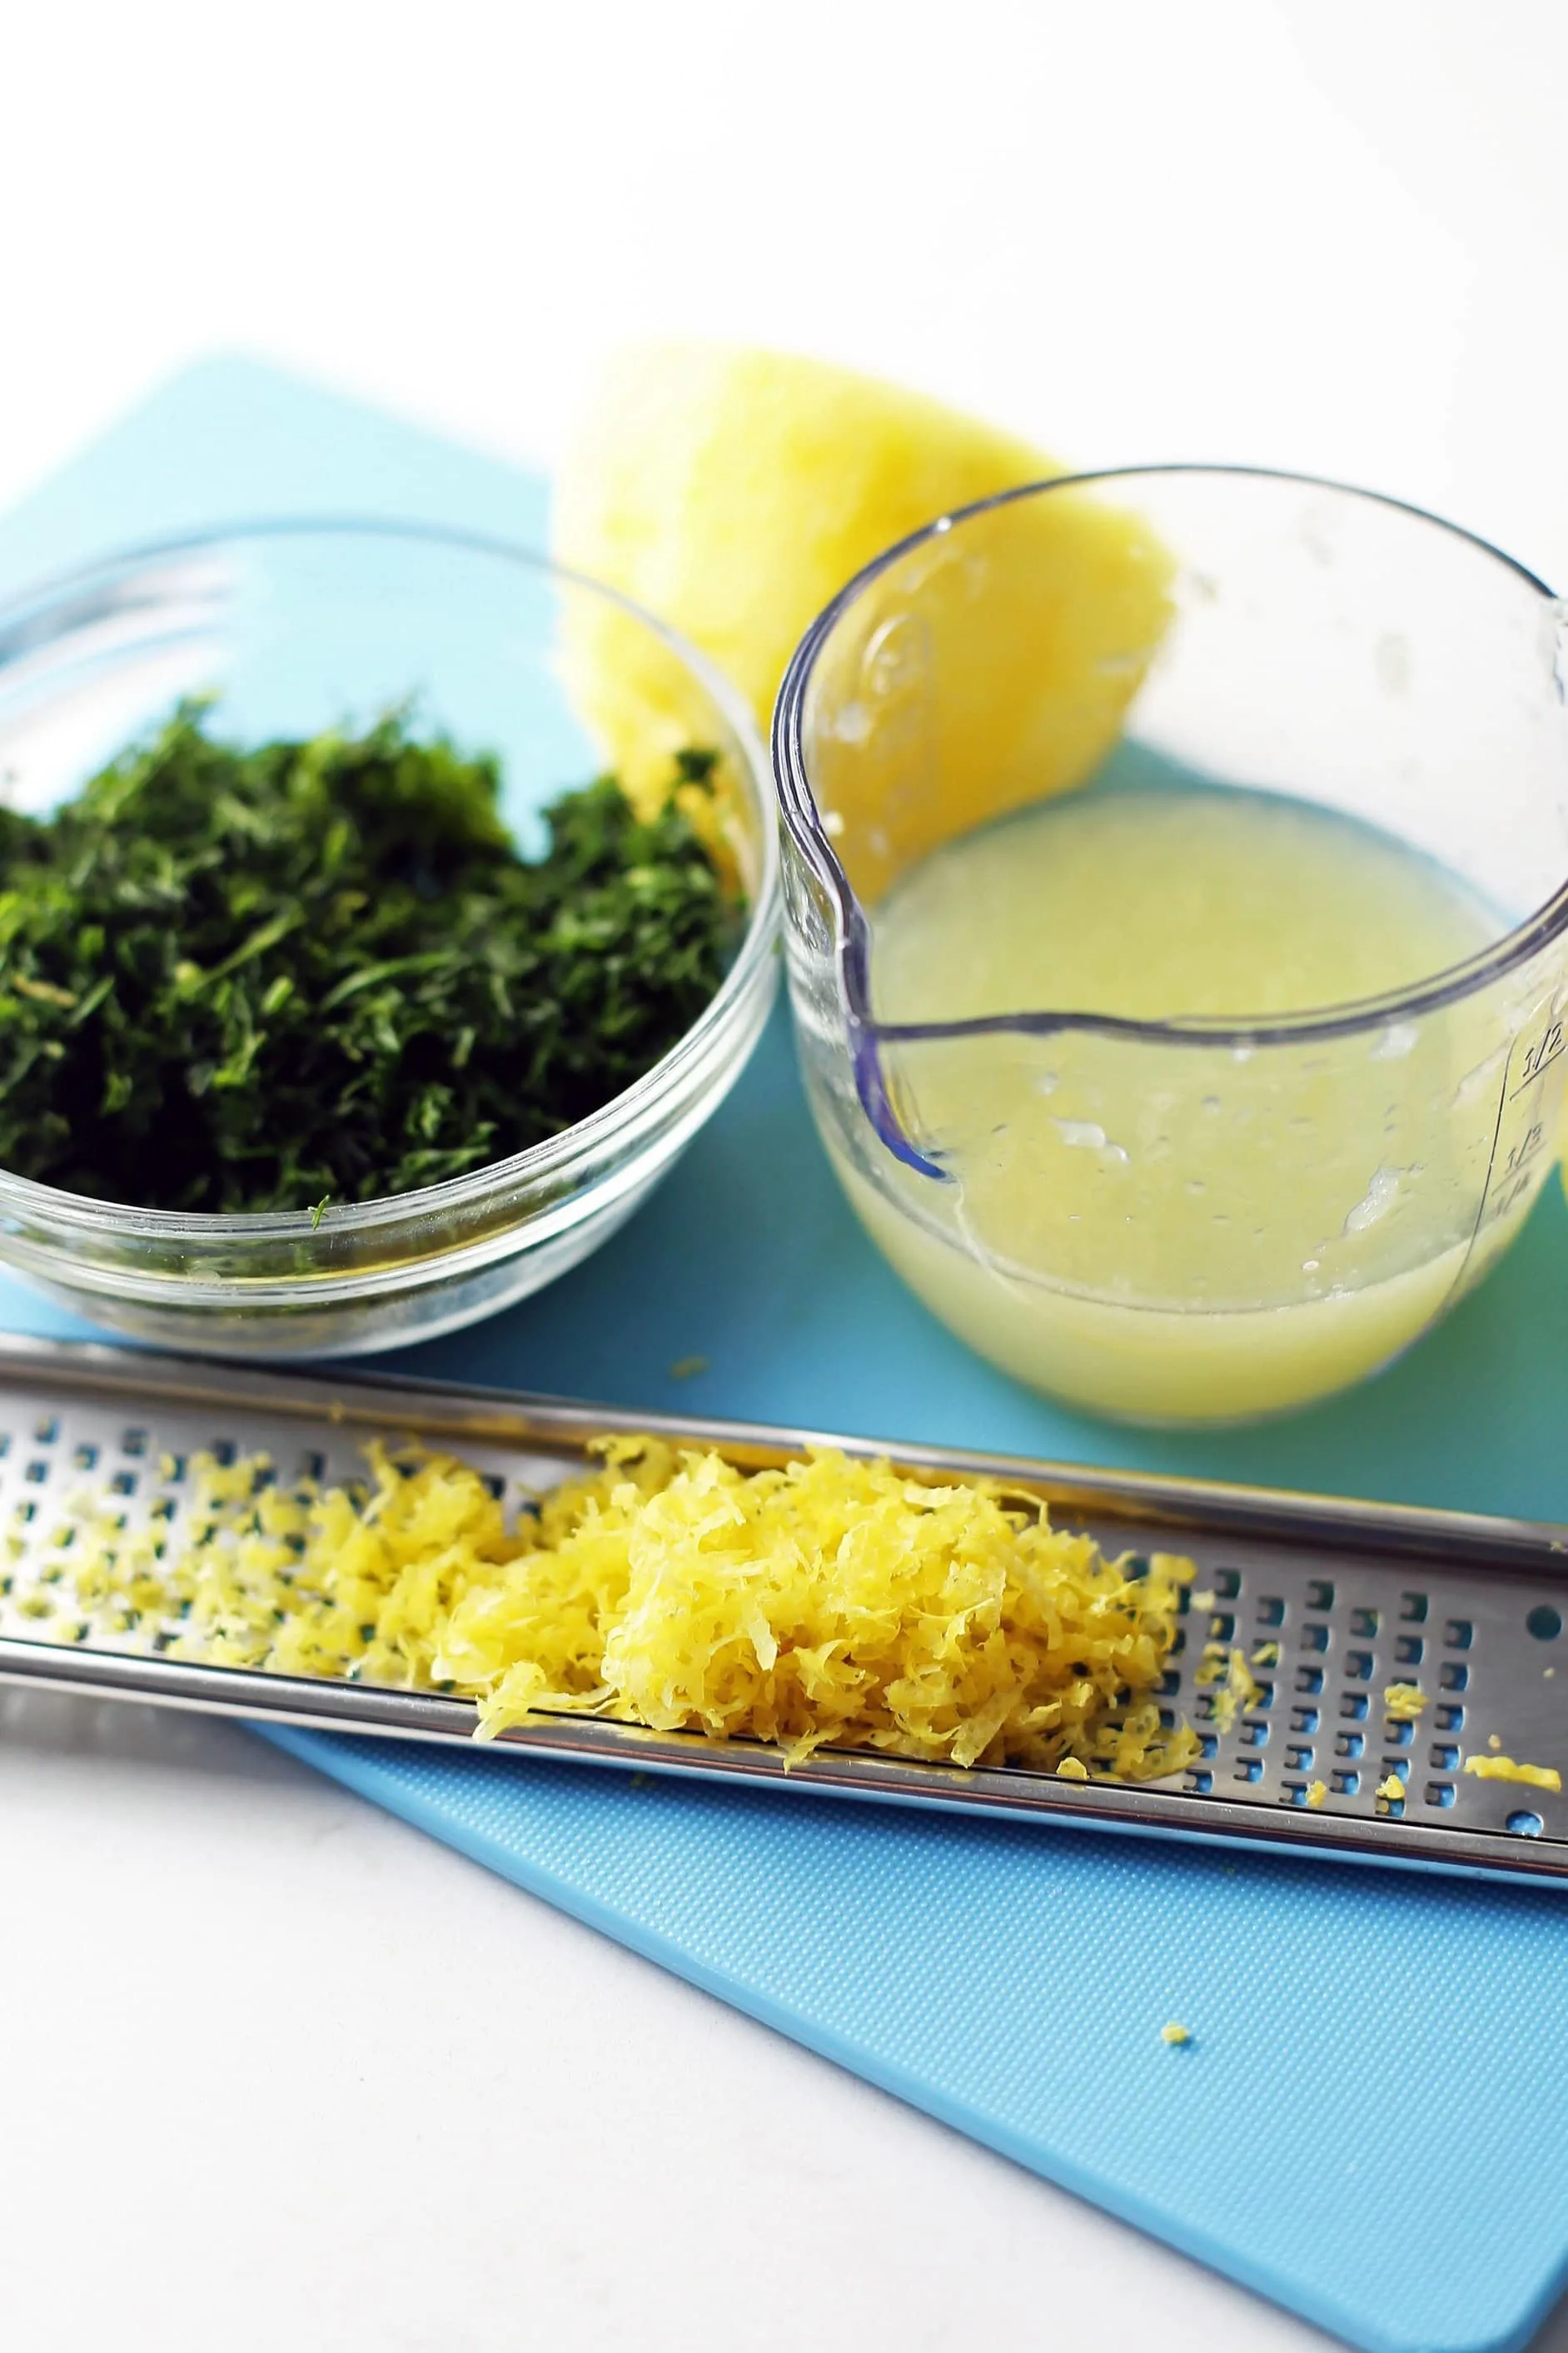 Lemon juice in a small measuring cup, lemon zest on a citrus zester, and minced fresh dill in a small glass bowl.